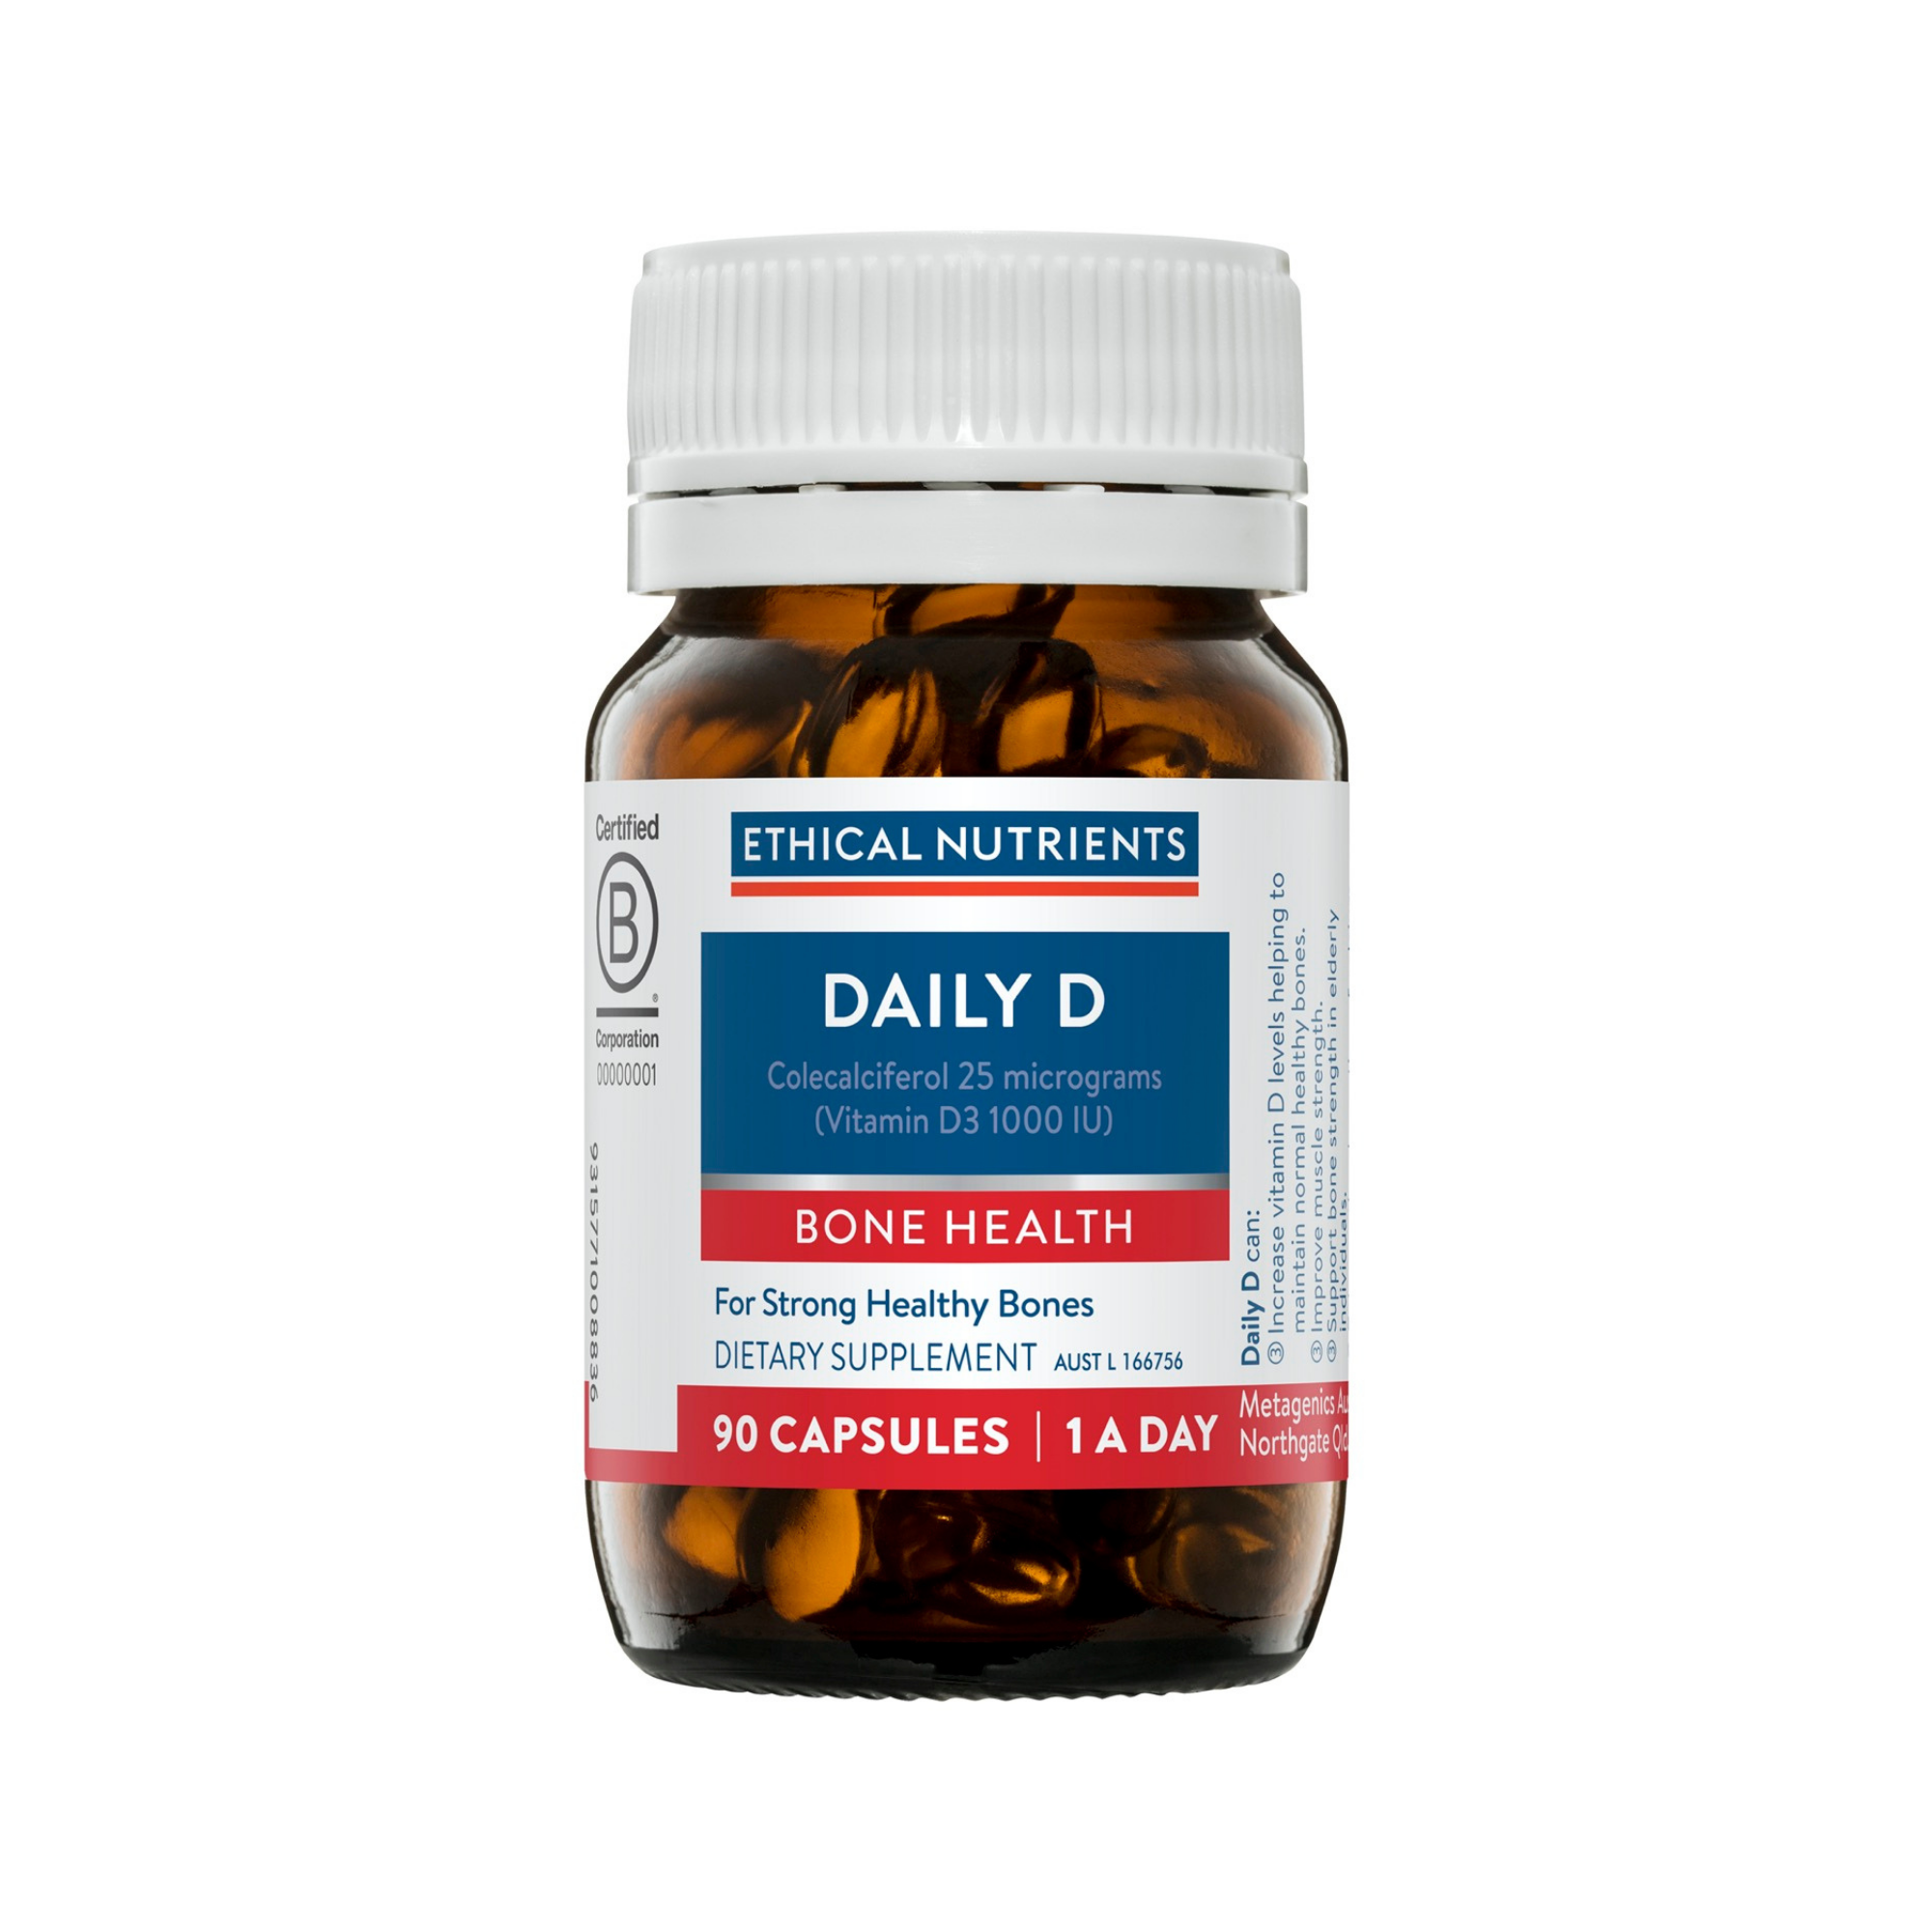 Ethical Nutrients Daily D 60 Capsules